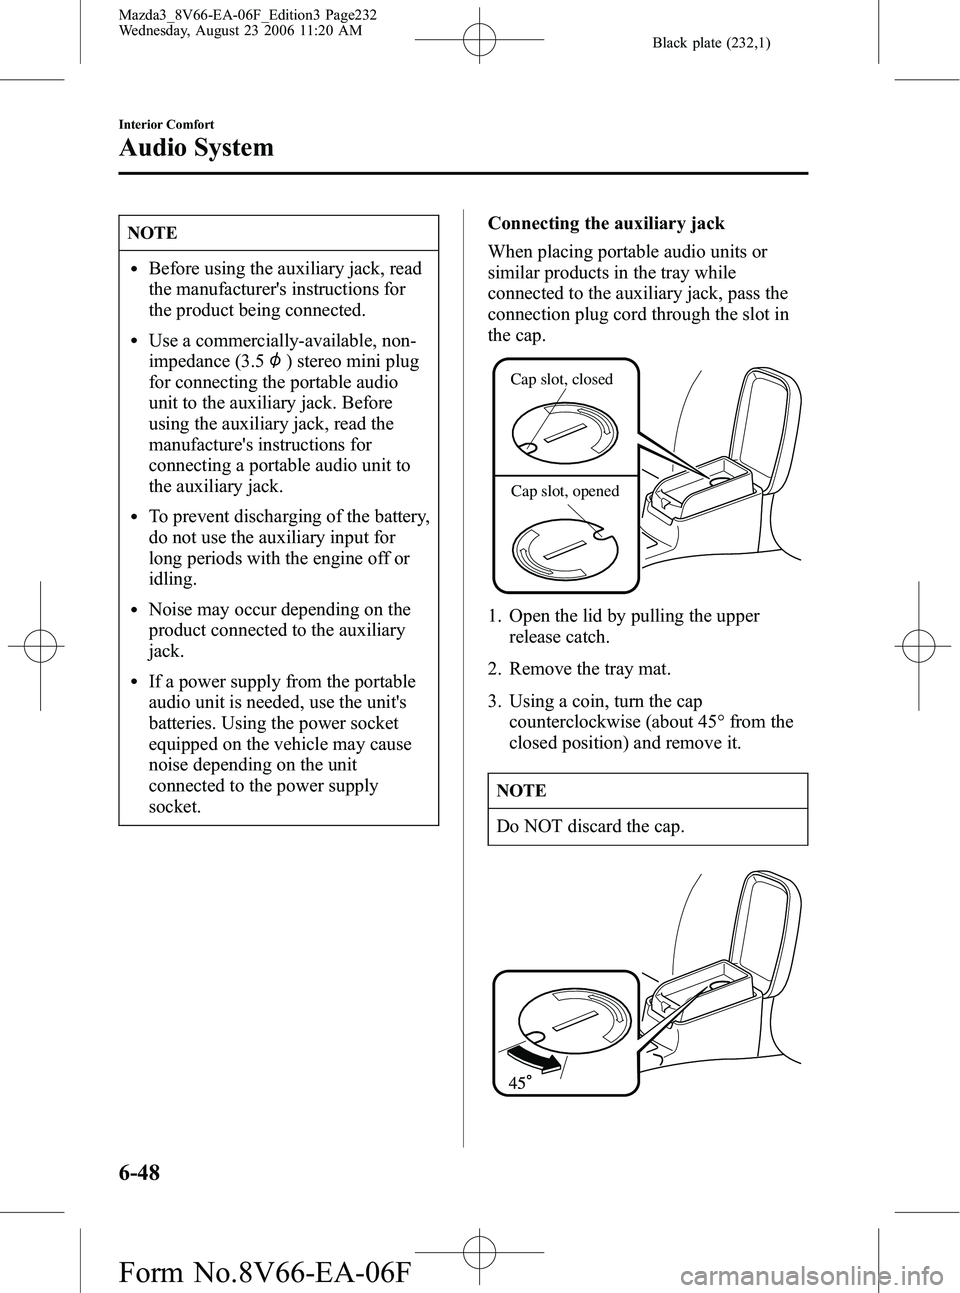 MAZDA MODEL 3 5-DOOR 2007  Owners Manual Black plate (232,1)
NOTE
lBefore using the auxiliary jack, read
the manufacturers instructions for
the product being connected.
lUse a commercially-available, non-
impedance (3.5
) stereo mini plug
f